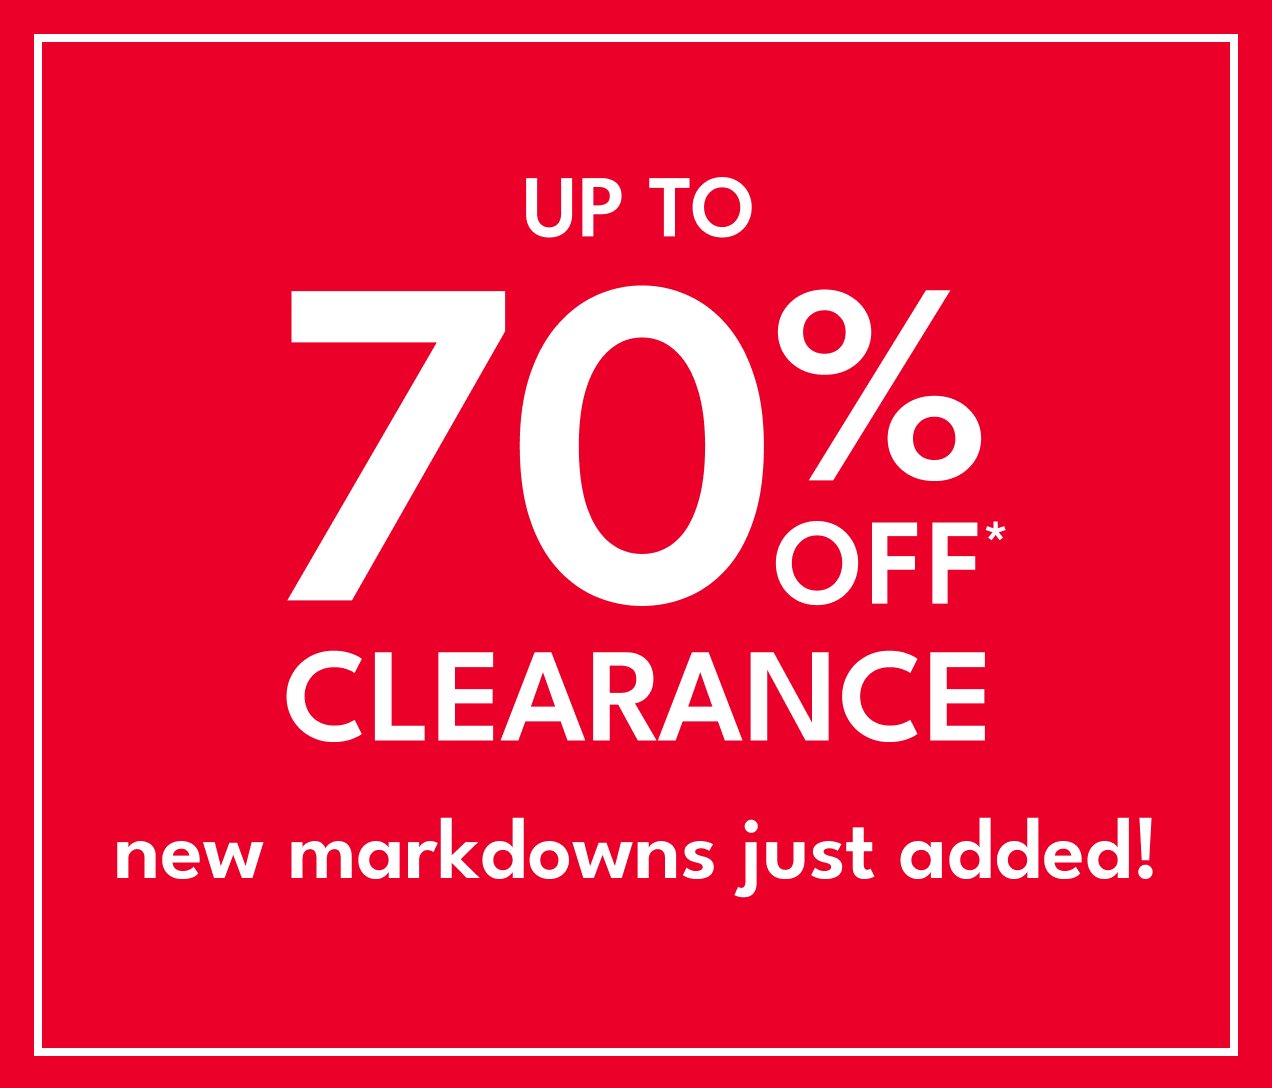 UP TO 70% OFF* CLEARANCE | new markdowns just added!